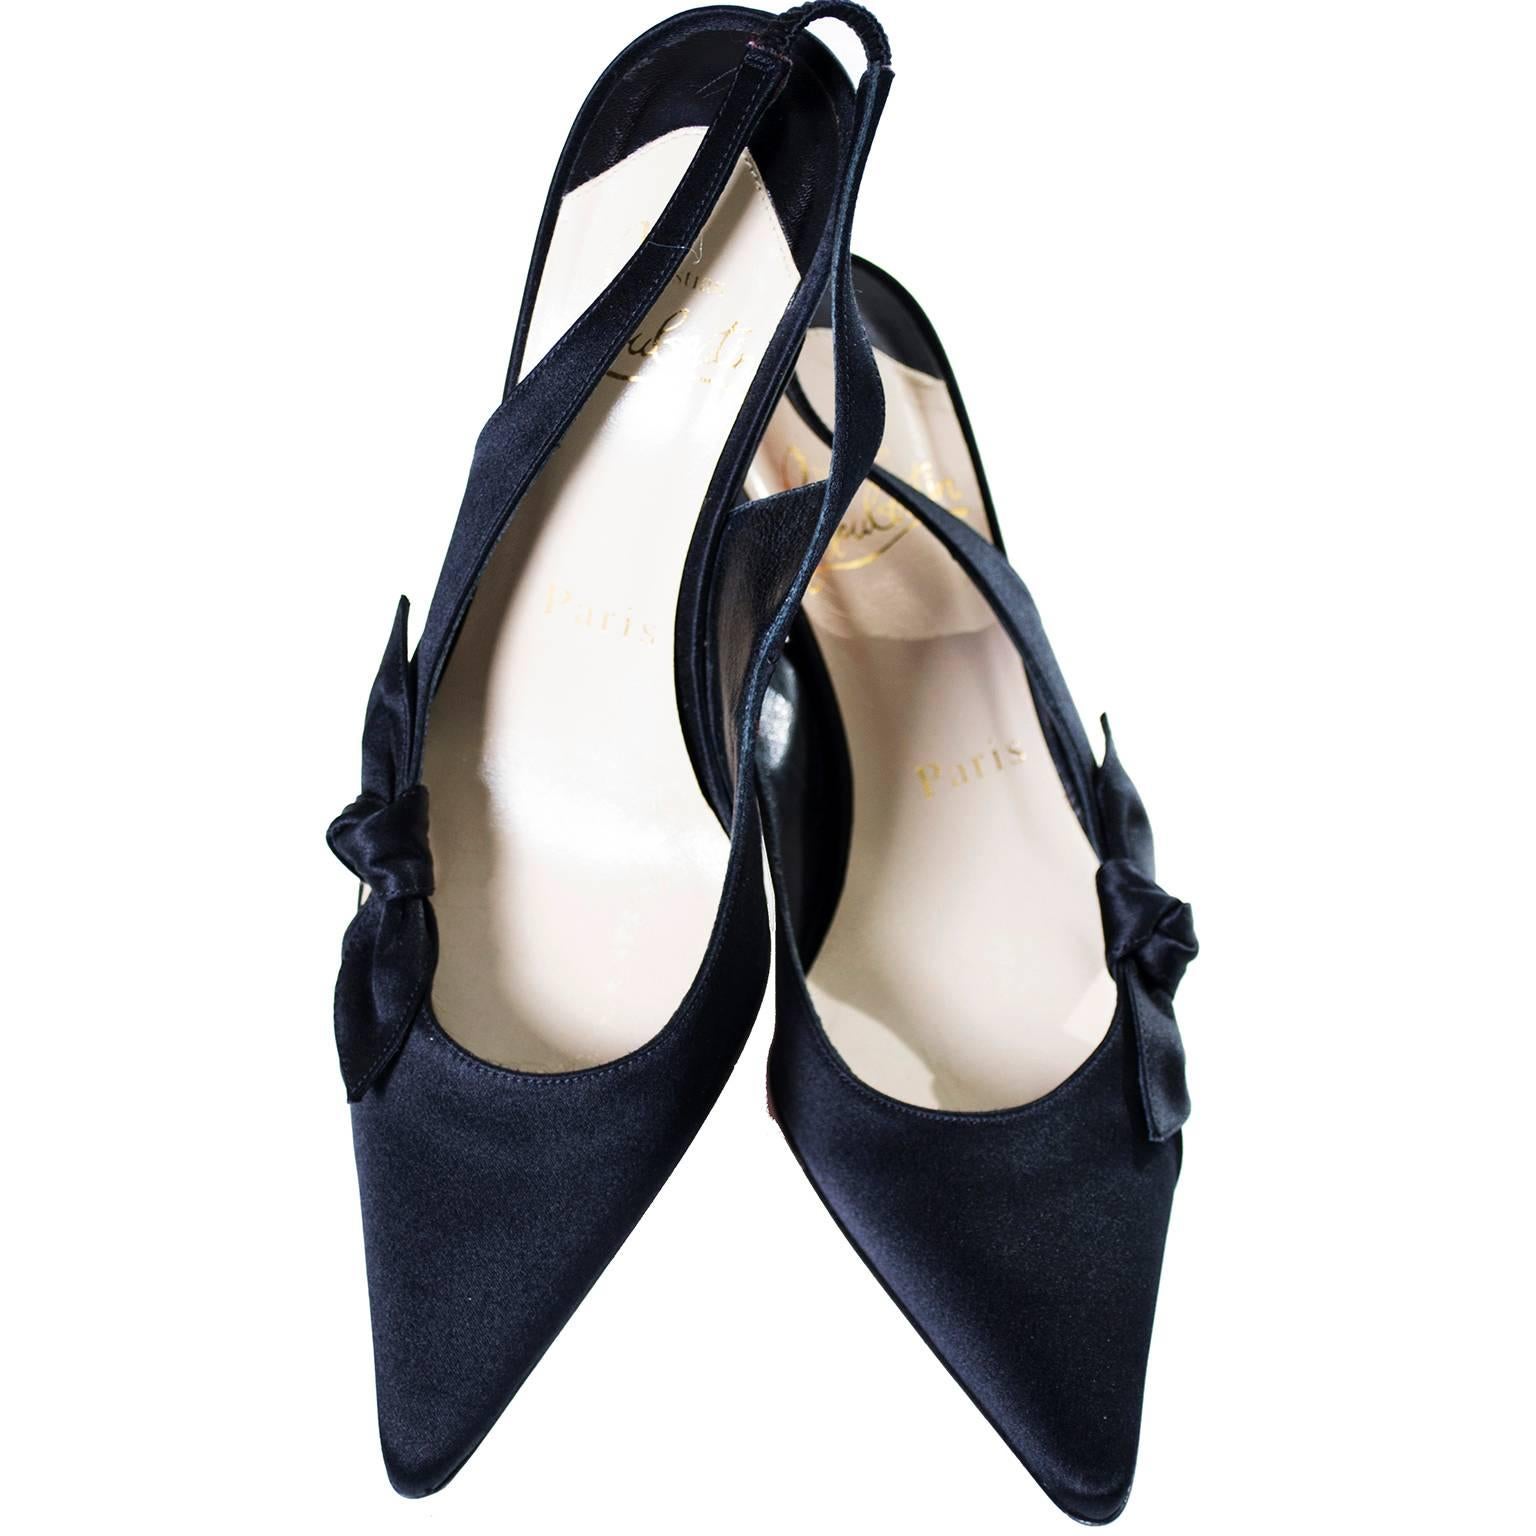 These are lovely black satin Christian Louboutin Paris sling backs with pretty side bows. These gorgeous shoes are labeled a European size 35.5 (US size 5.5), and have only very minor sole scuffs, and are otherwise in excellent.  The heels are 3 and